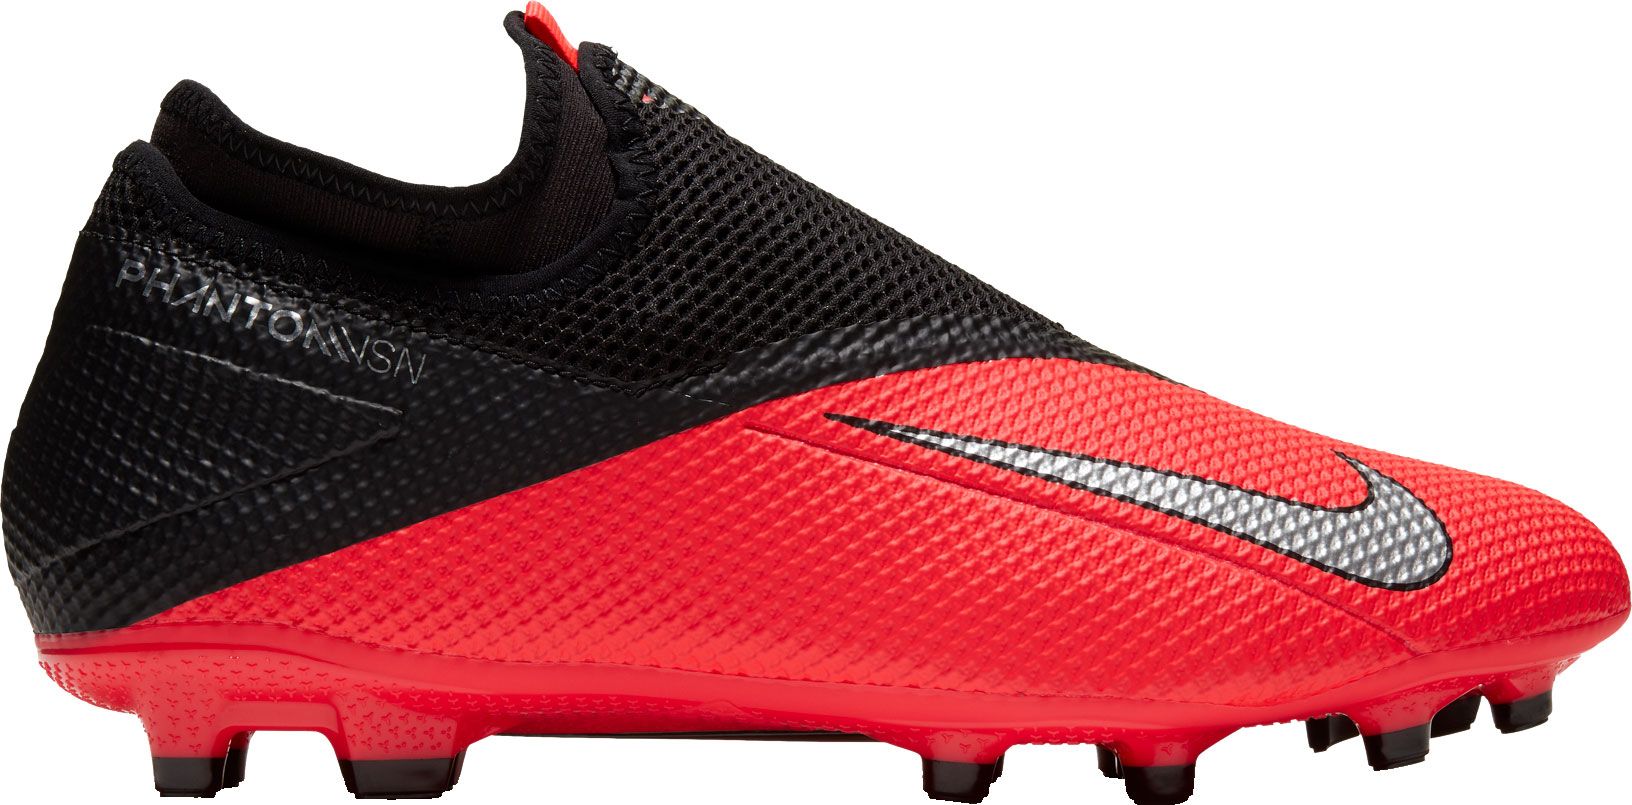 soccer cleats under 50 dollars